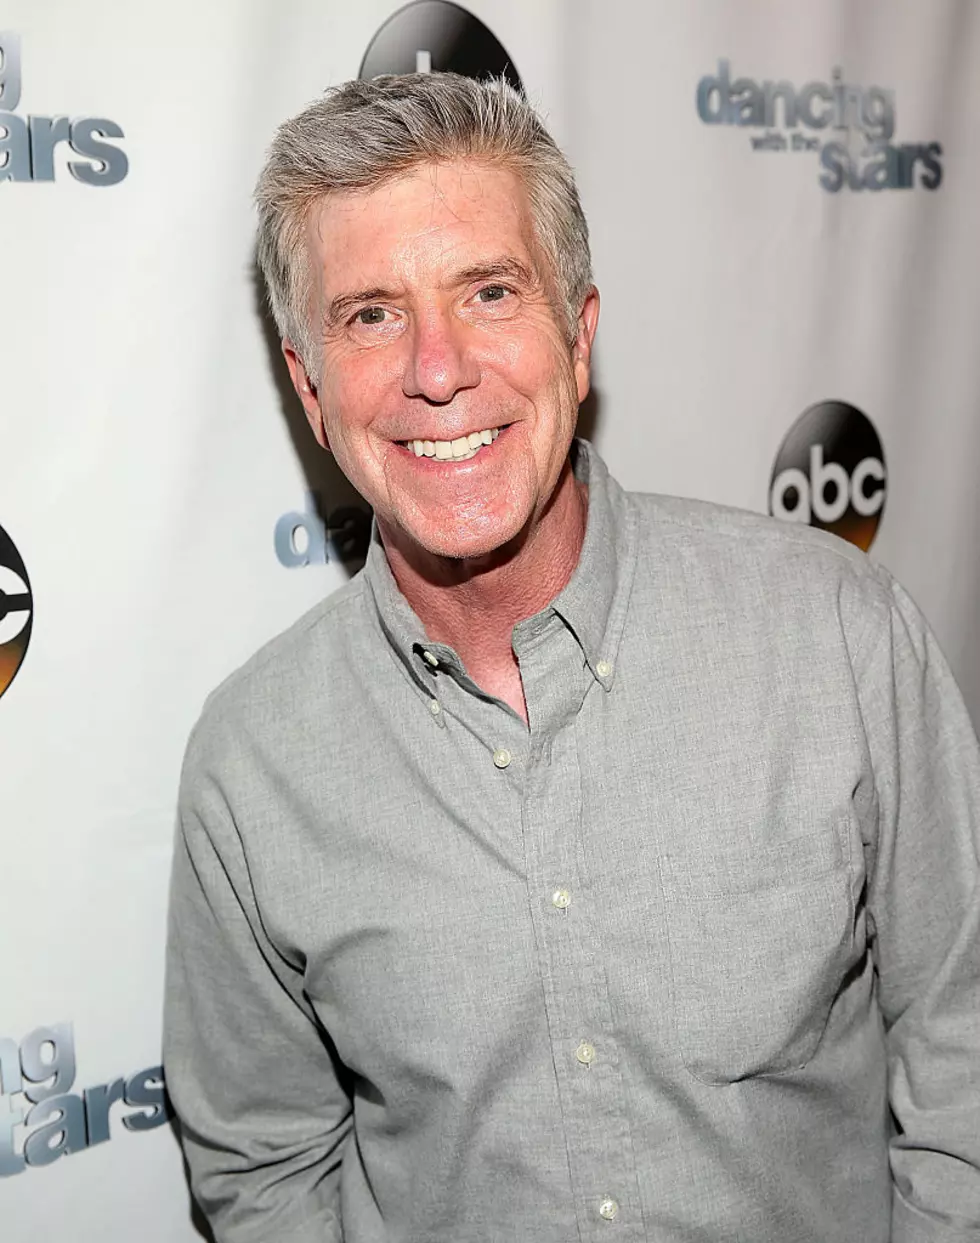 After 15 Years ‘Dancing With The Stars’ Is Letting Tom Bergeron And Erin Andrews Go